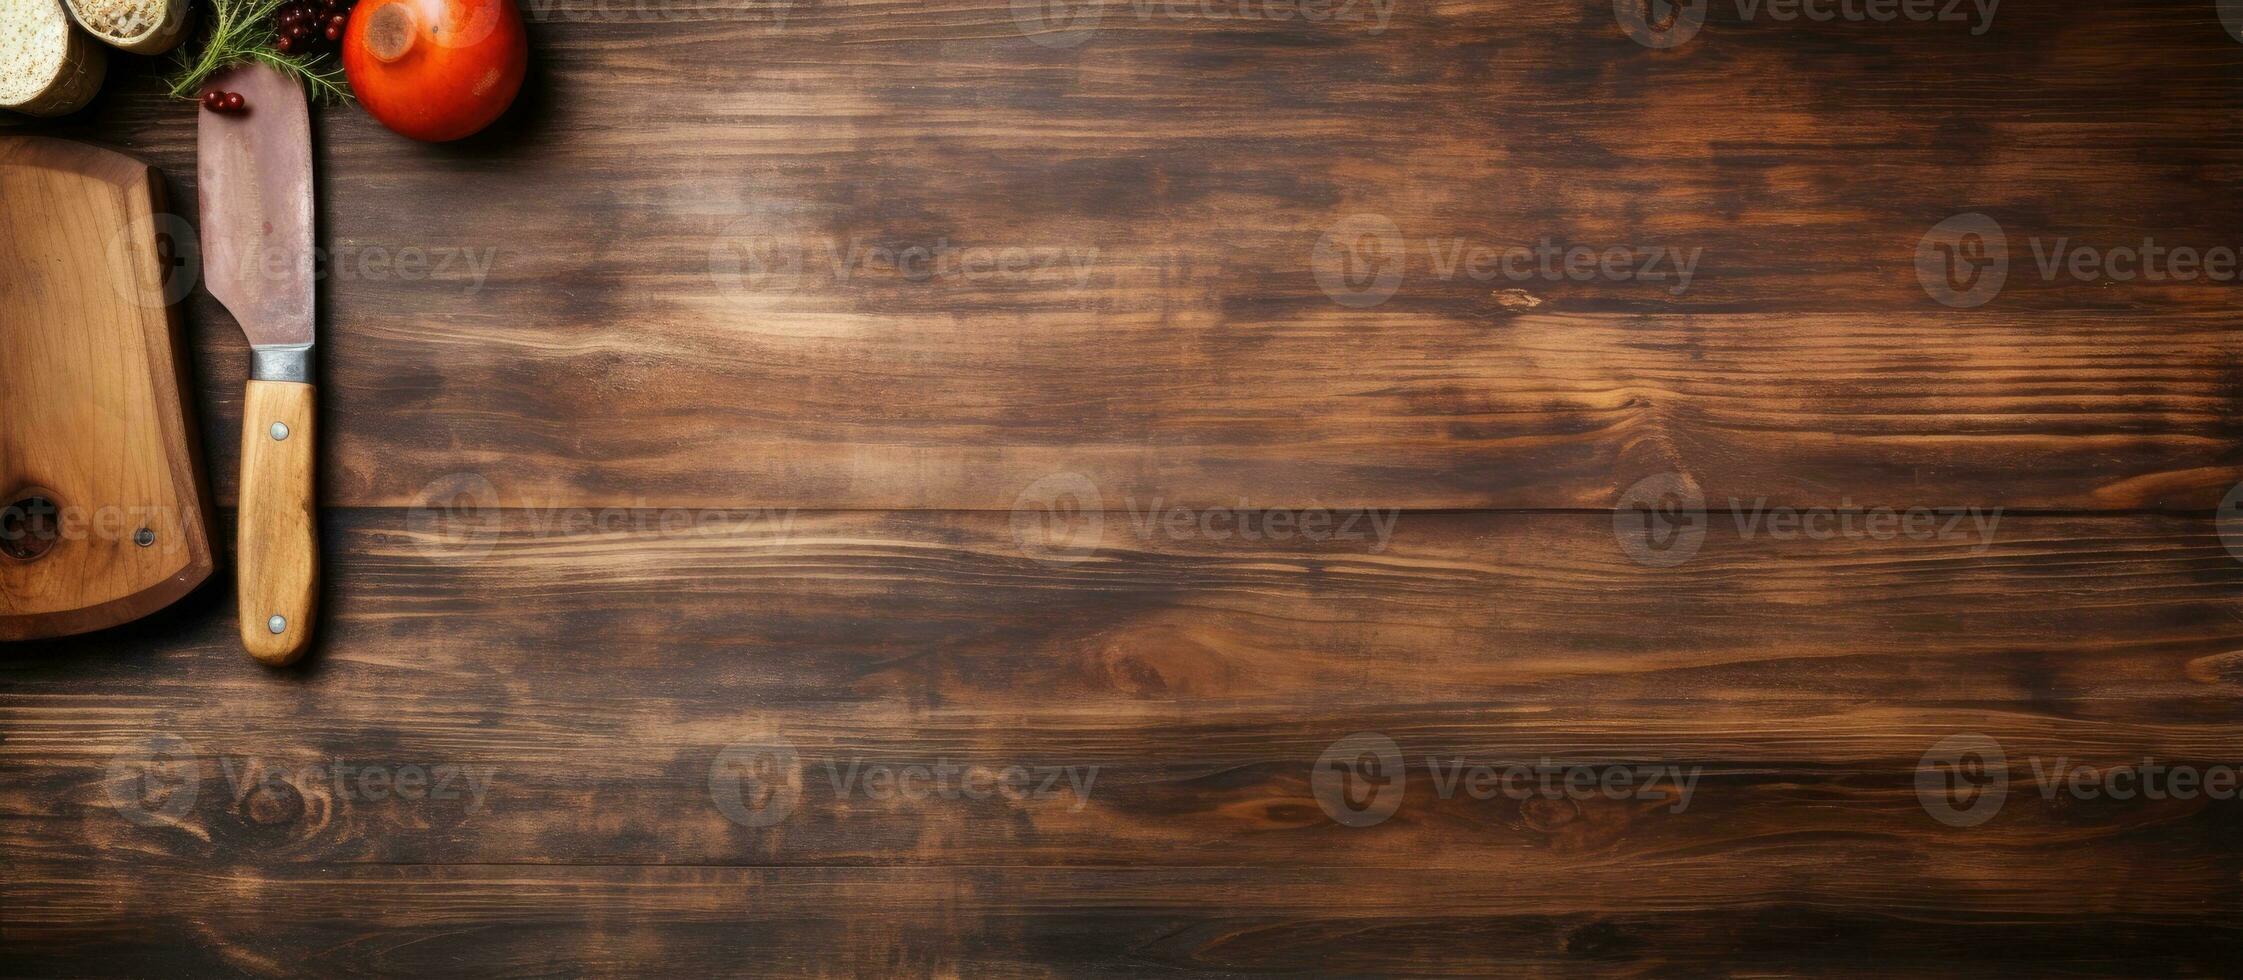 Closeup of wooden kitchen board in home interior concept photo